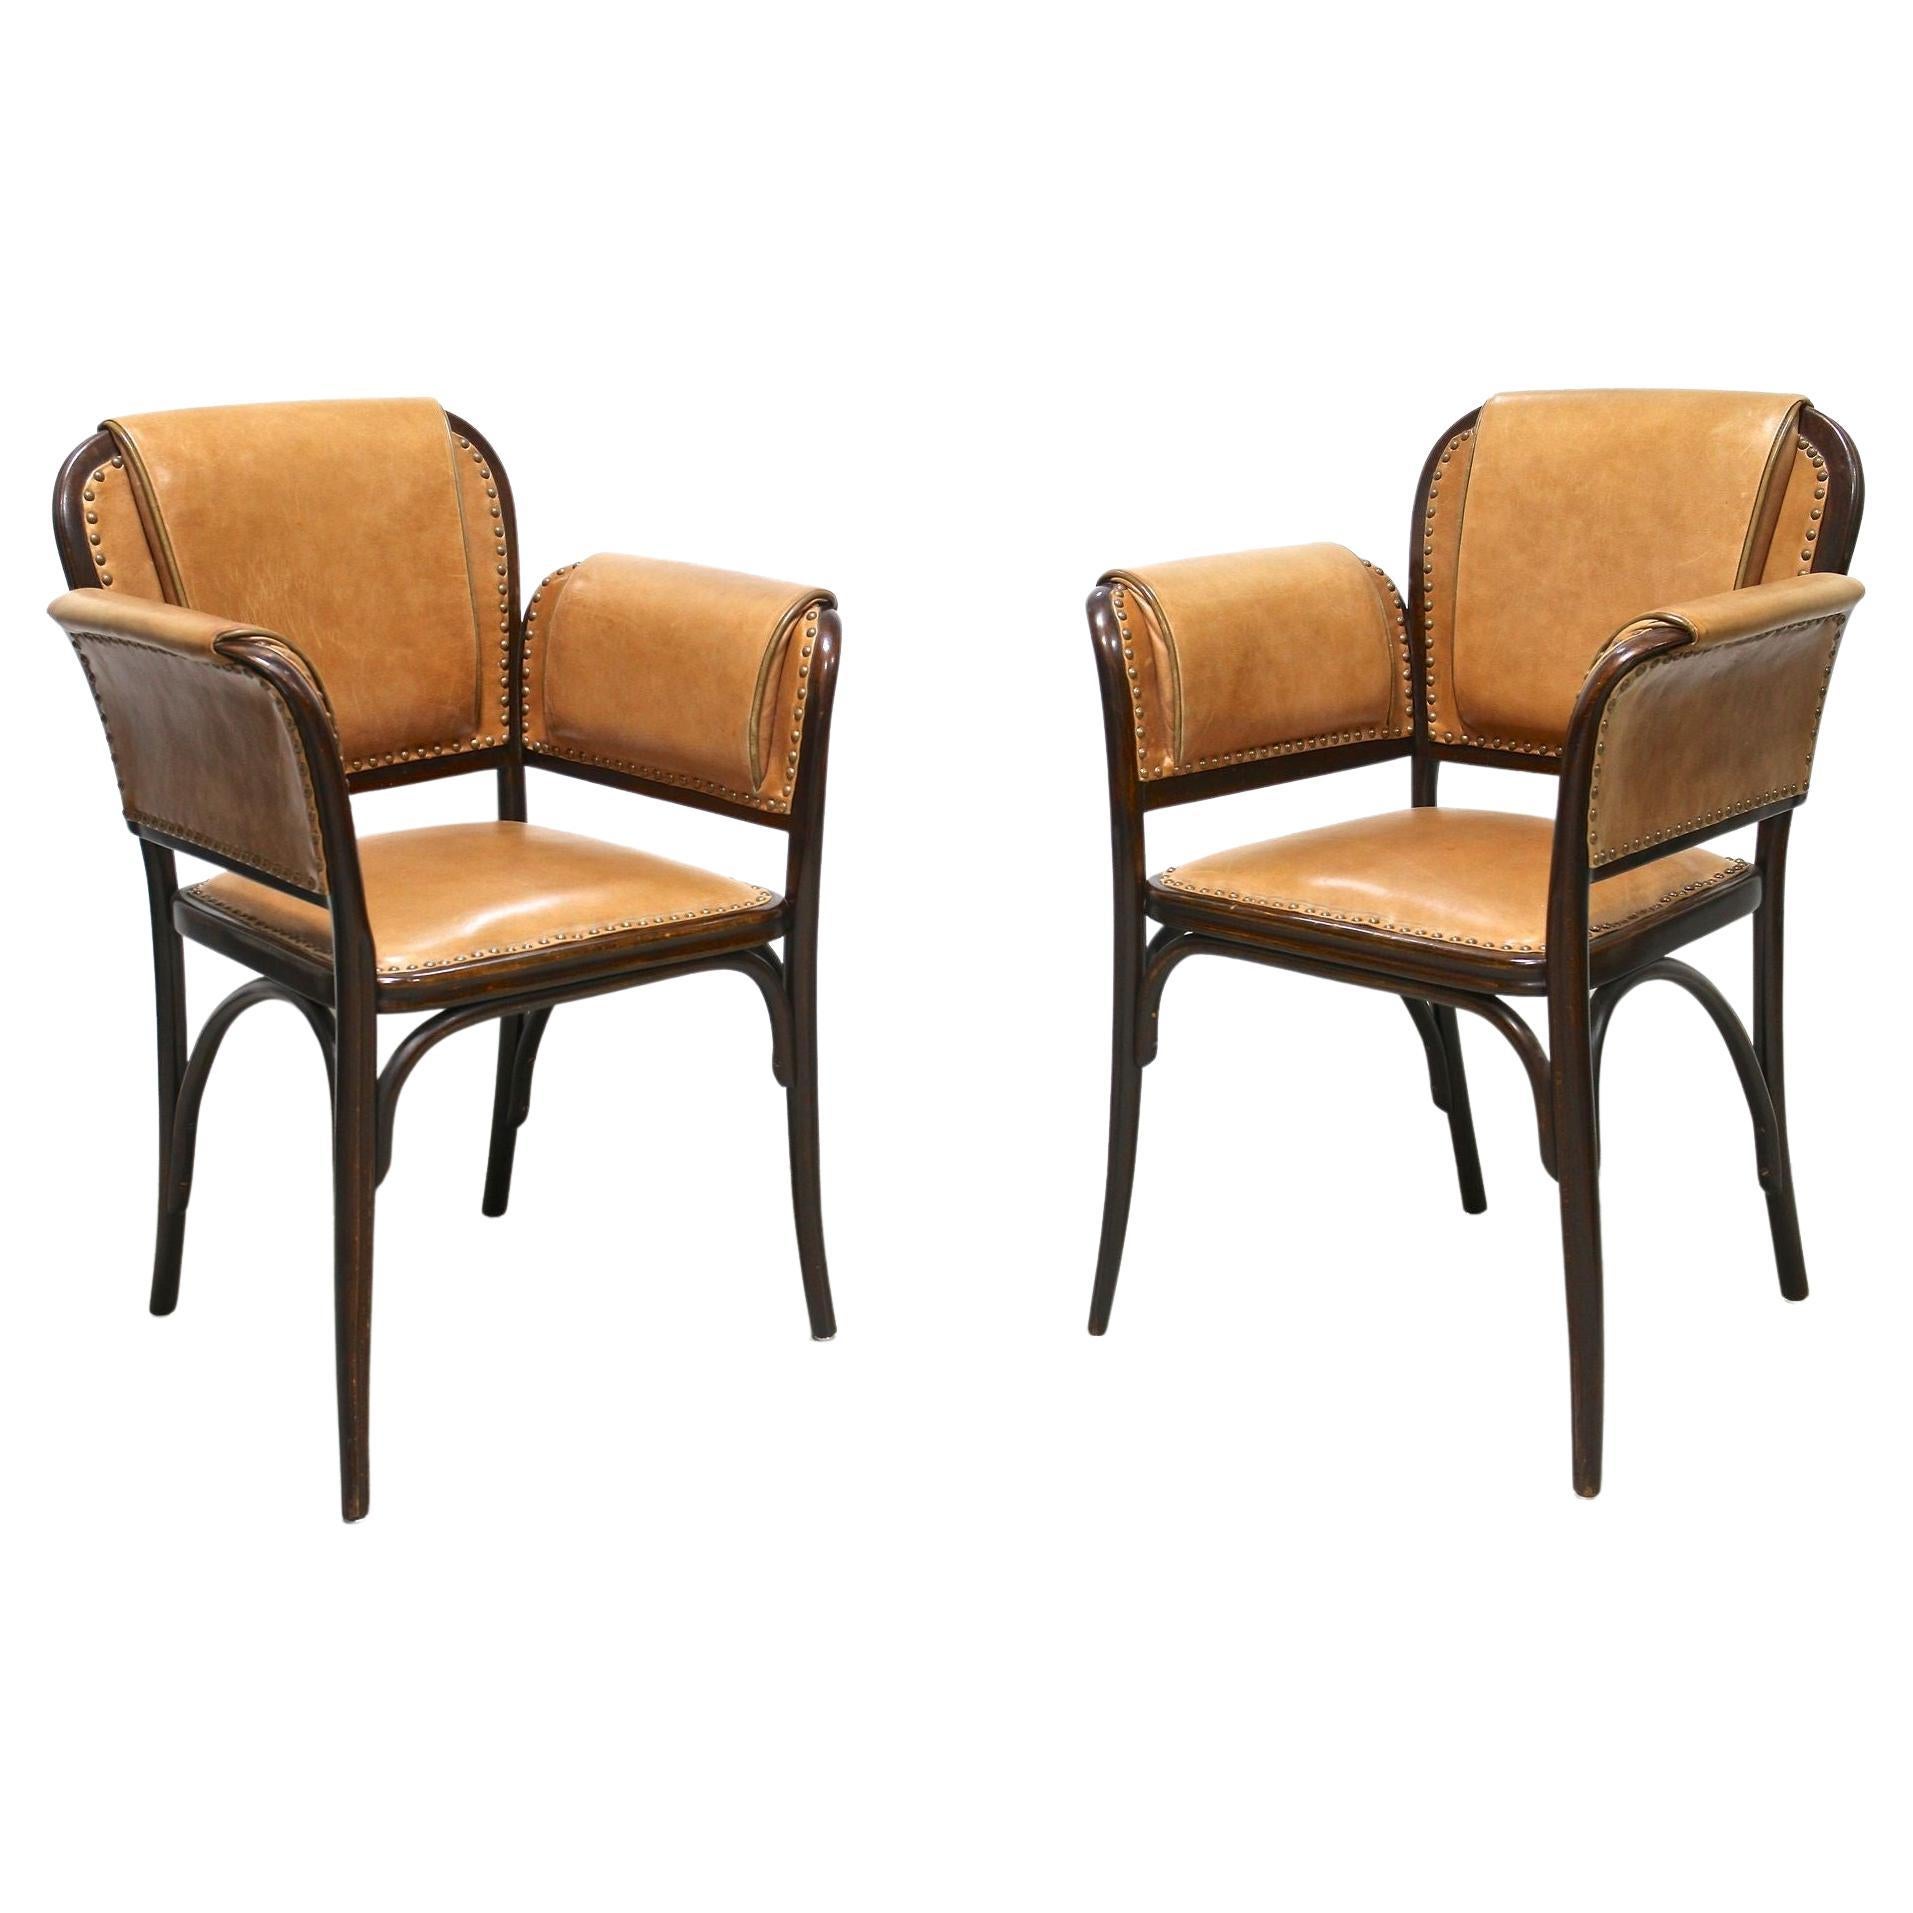 Pair of 20th Century Art Nouveau Bentwood Armchairs by Thonet, Austria, Ca. 1904 For Sale